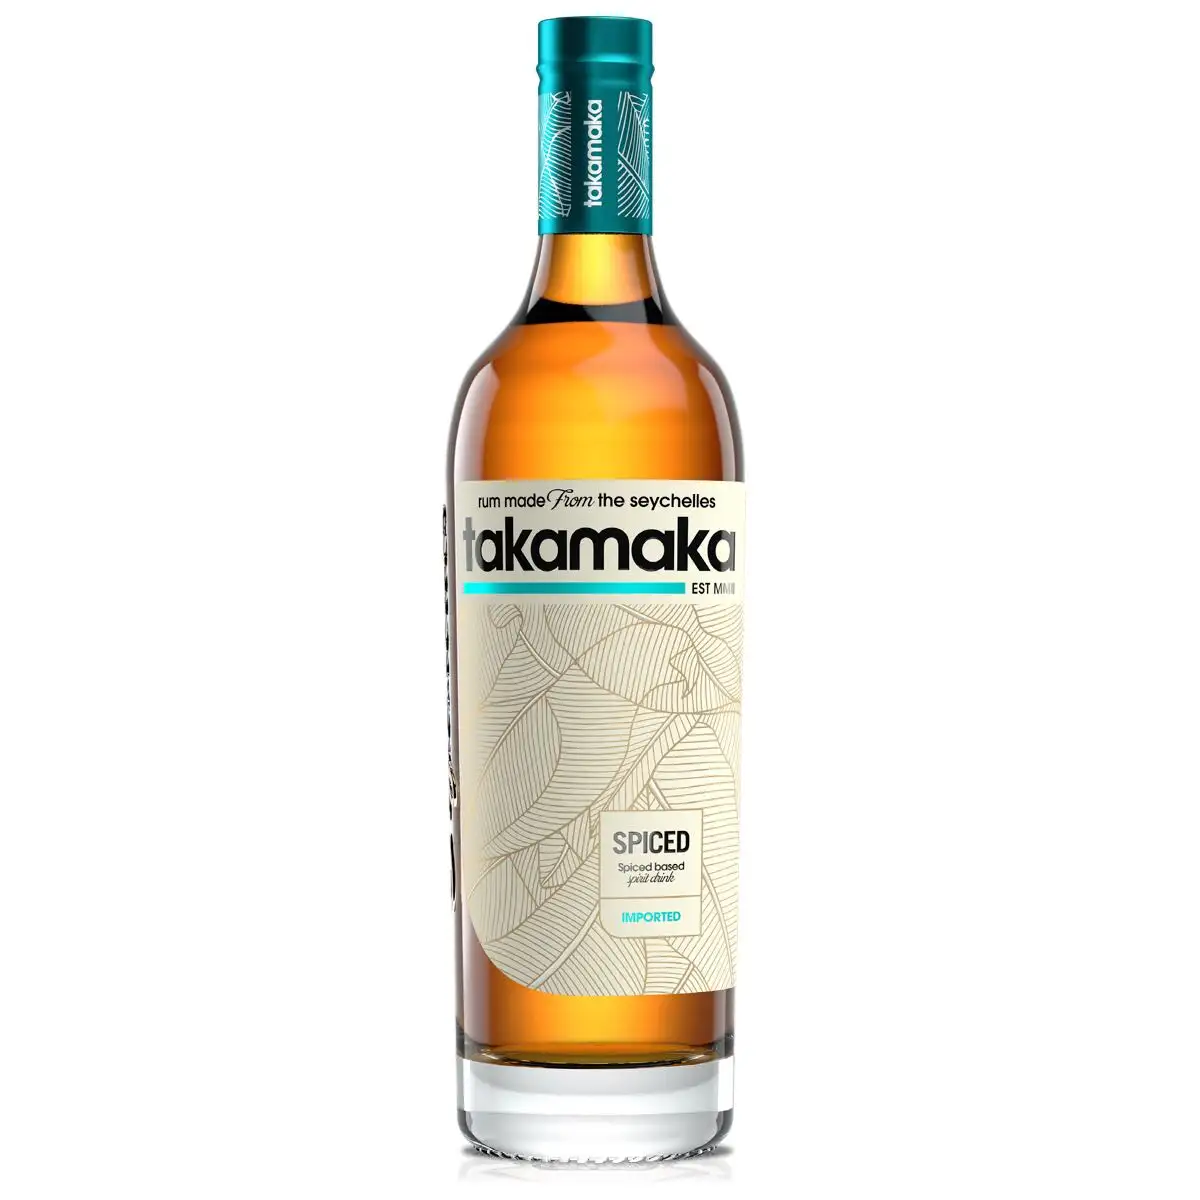 Image of the front of the bottle of the rum Takamaka Spiced Rum